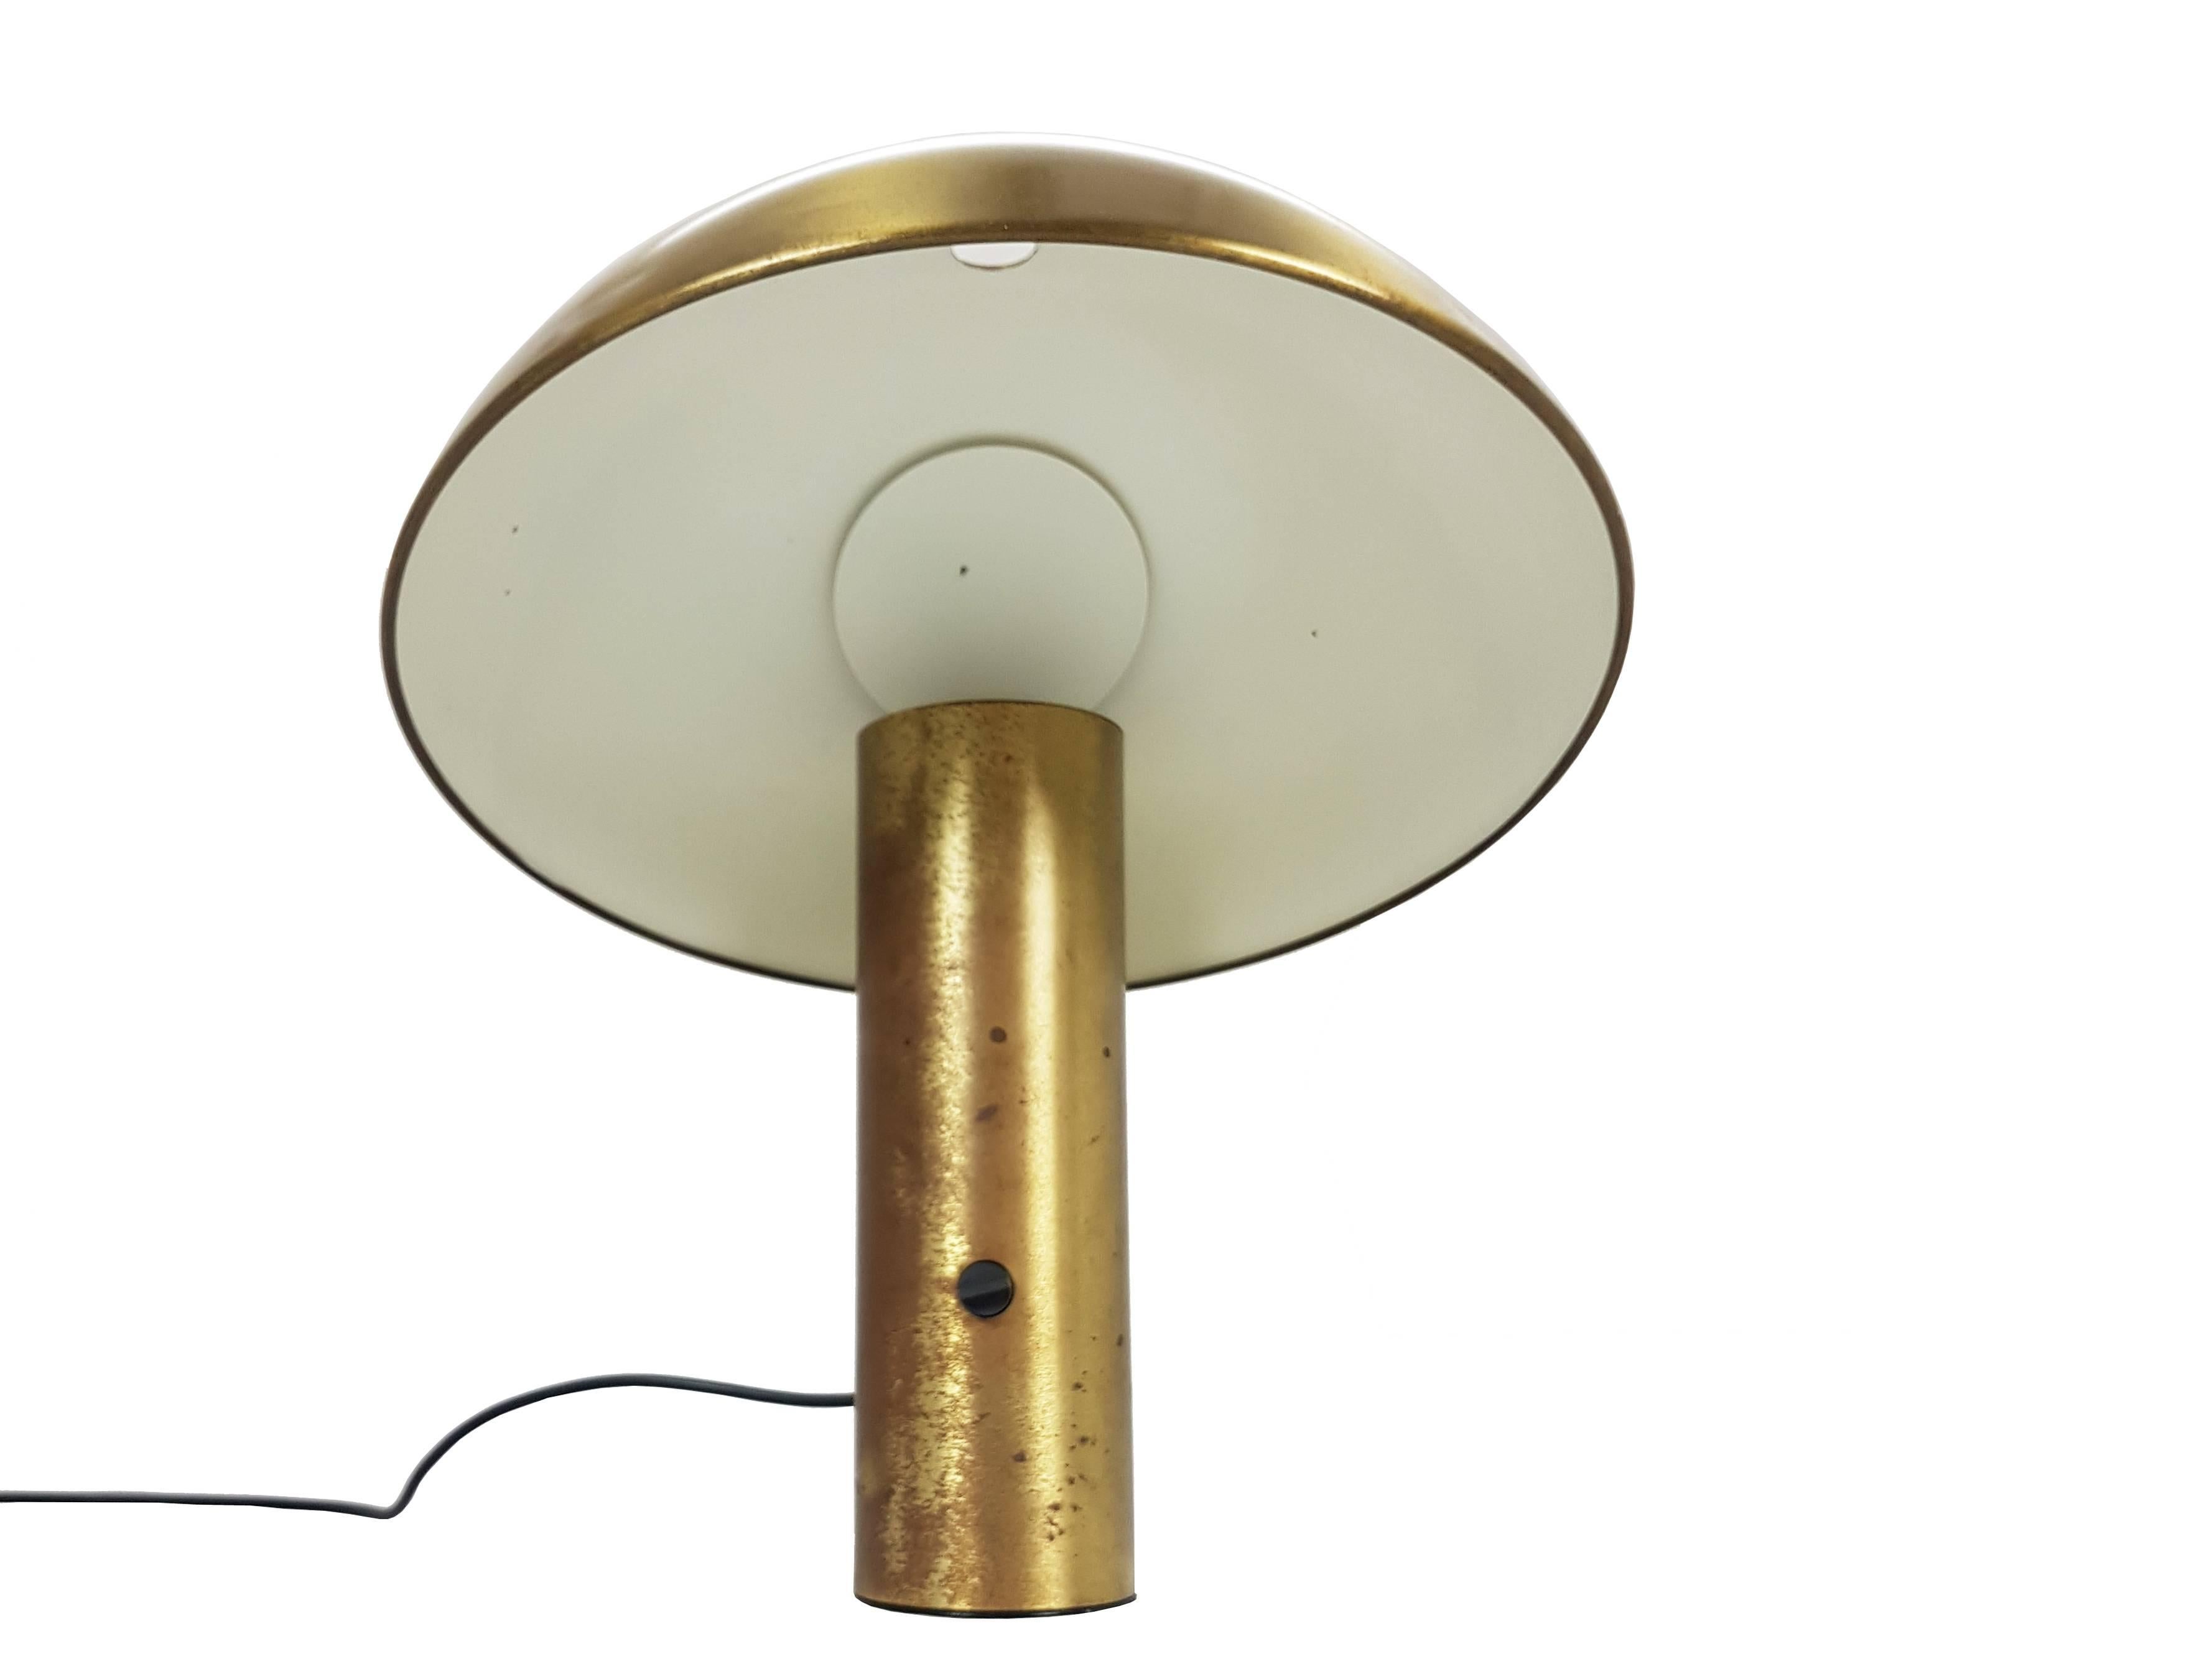 This table lamp was designed by Franco Mirenzi for Valenti in 1978. It is made from mat brass and metal and it features a dimmable electrical system. Fair vintage condition: Signs of wear and oxidation patina consistent with age and use. See